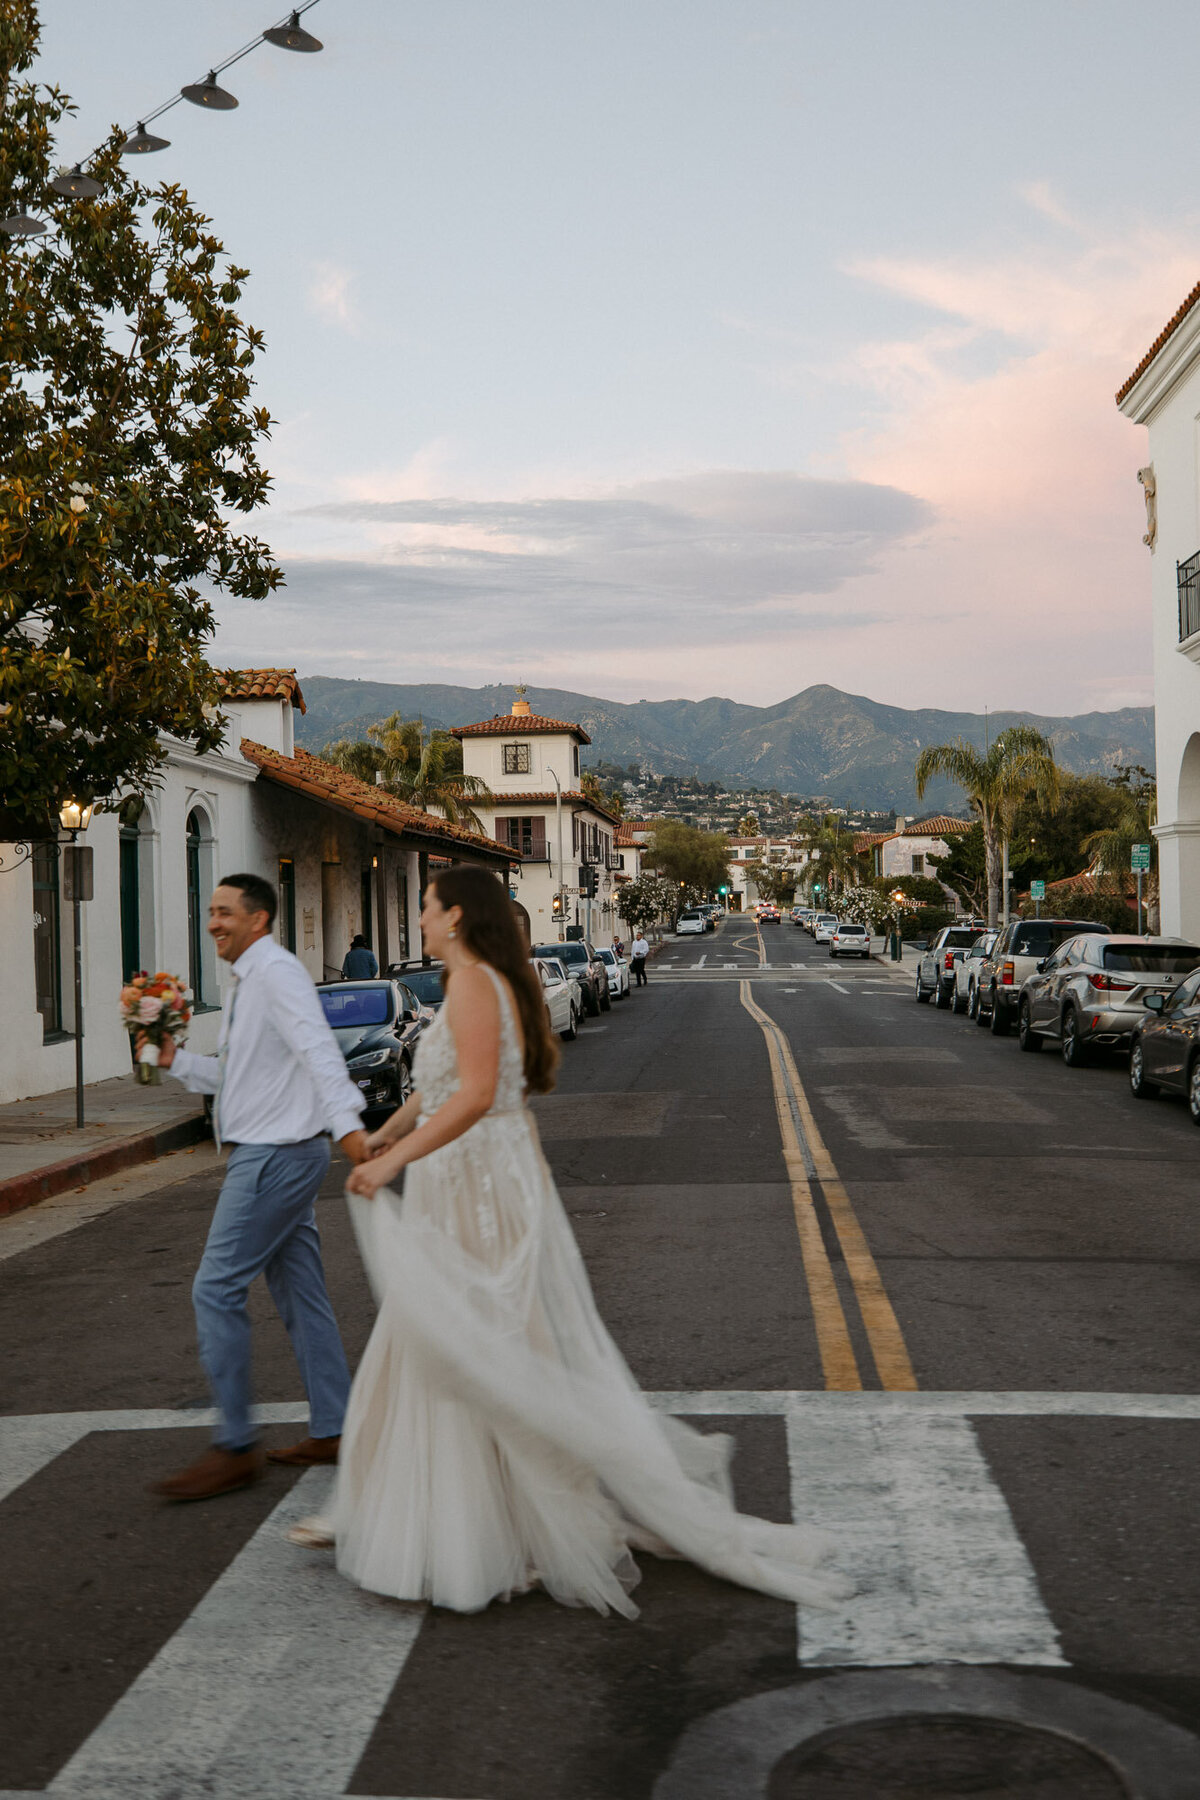 Image of a couple after ceremony in Santa Barbara, CA by Chris Tack